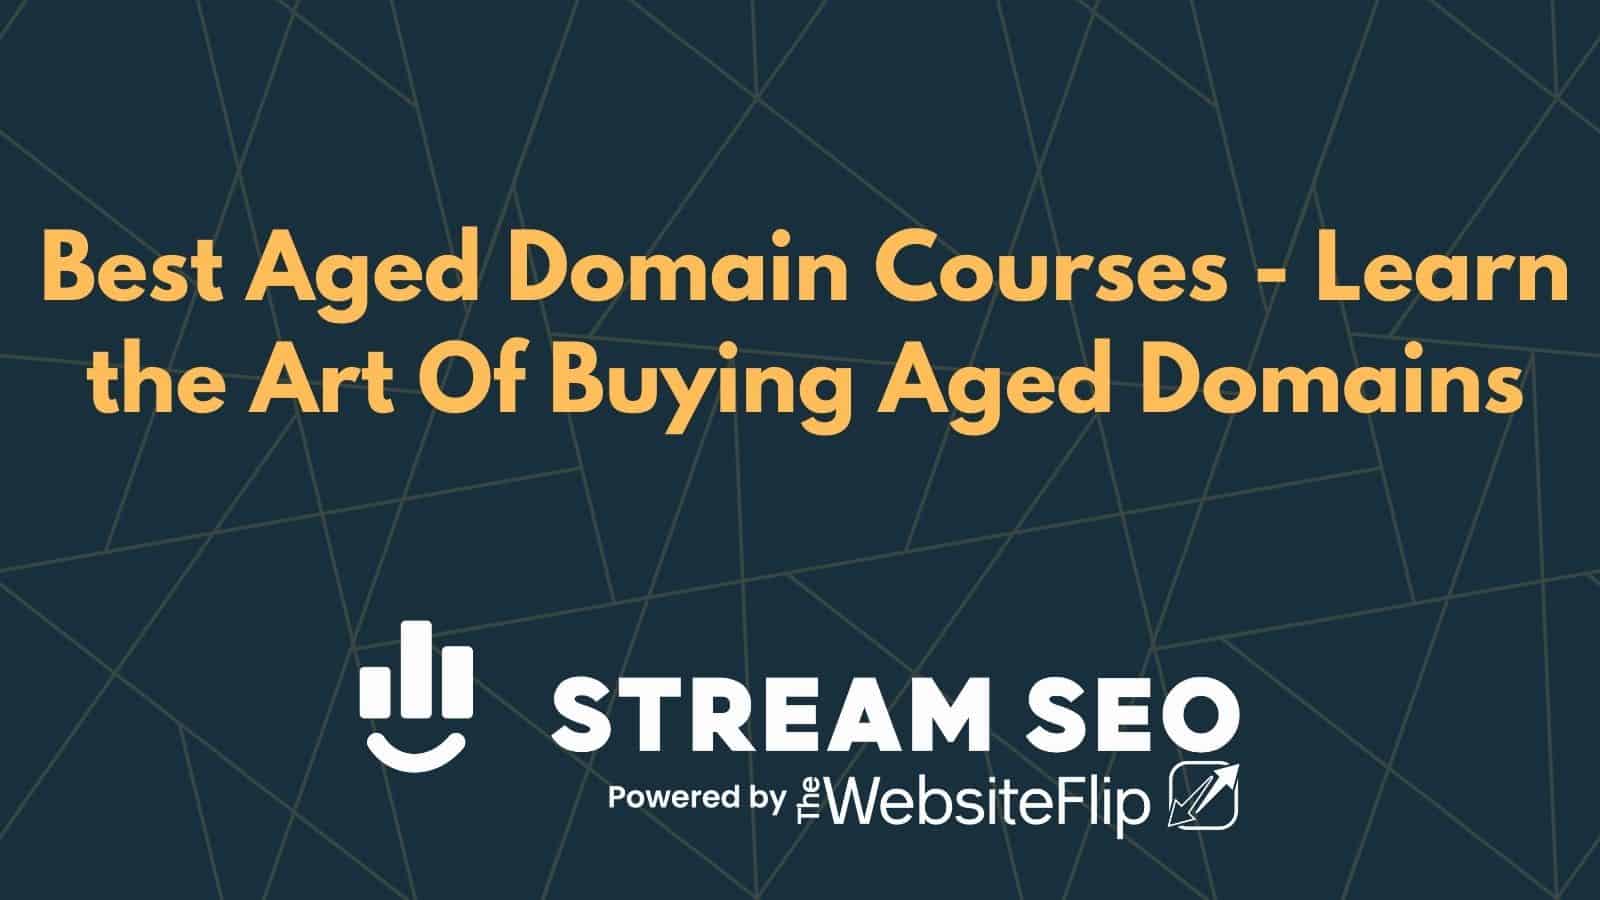 Best Aged Domain Courses